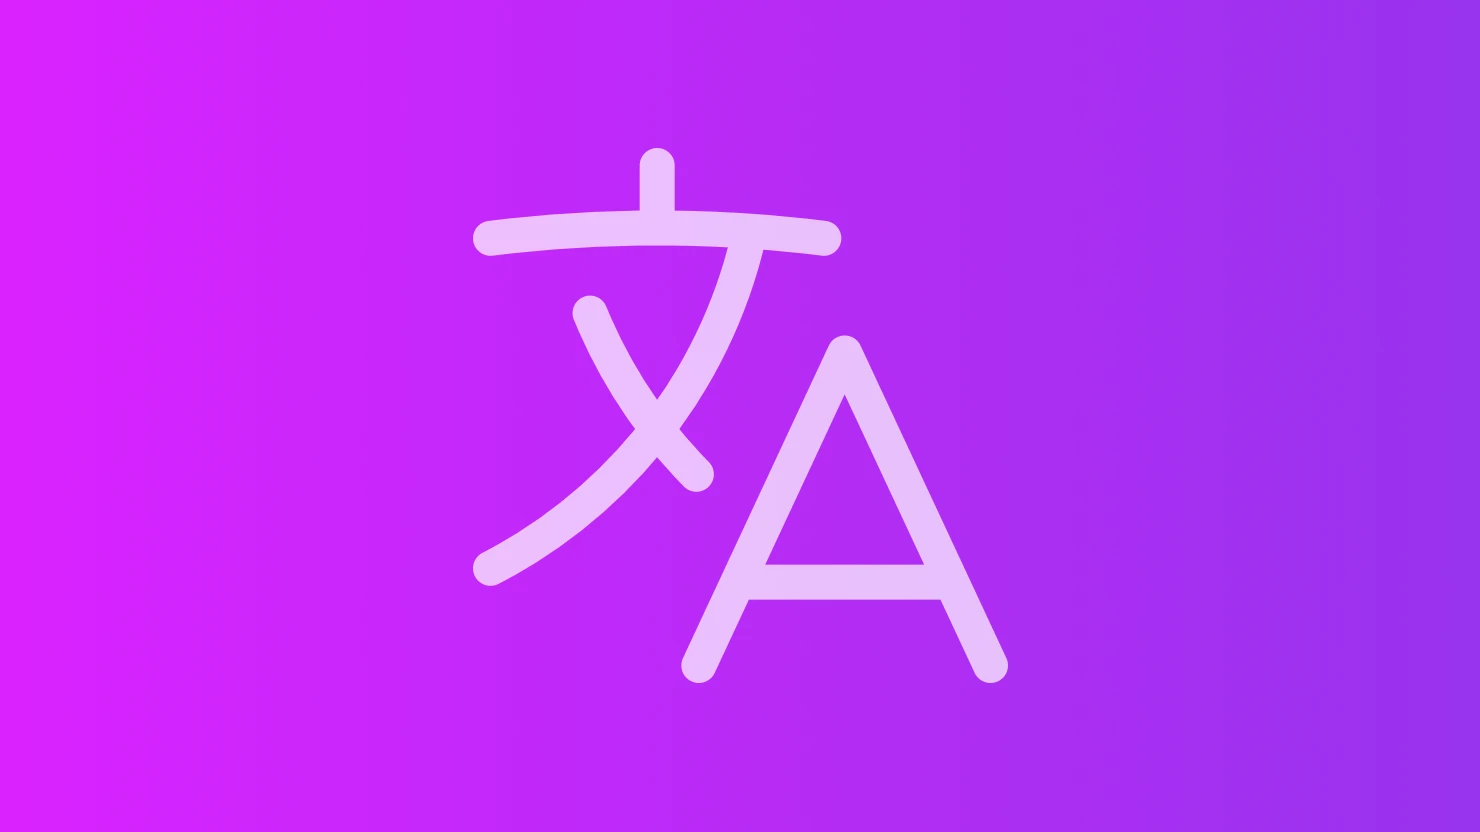 A stylized representation of a translation icon, with Chinese text in the upper left corner and English A in the lower right corner.